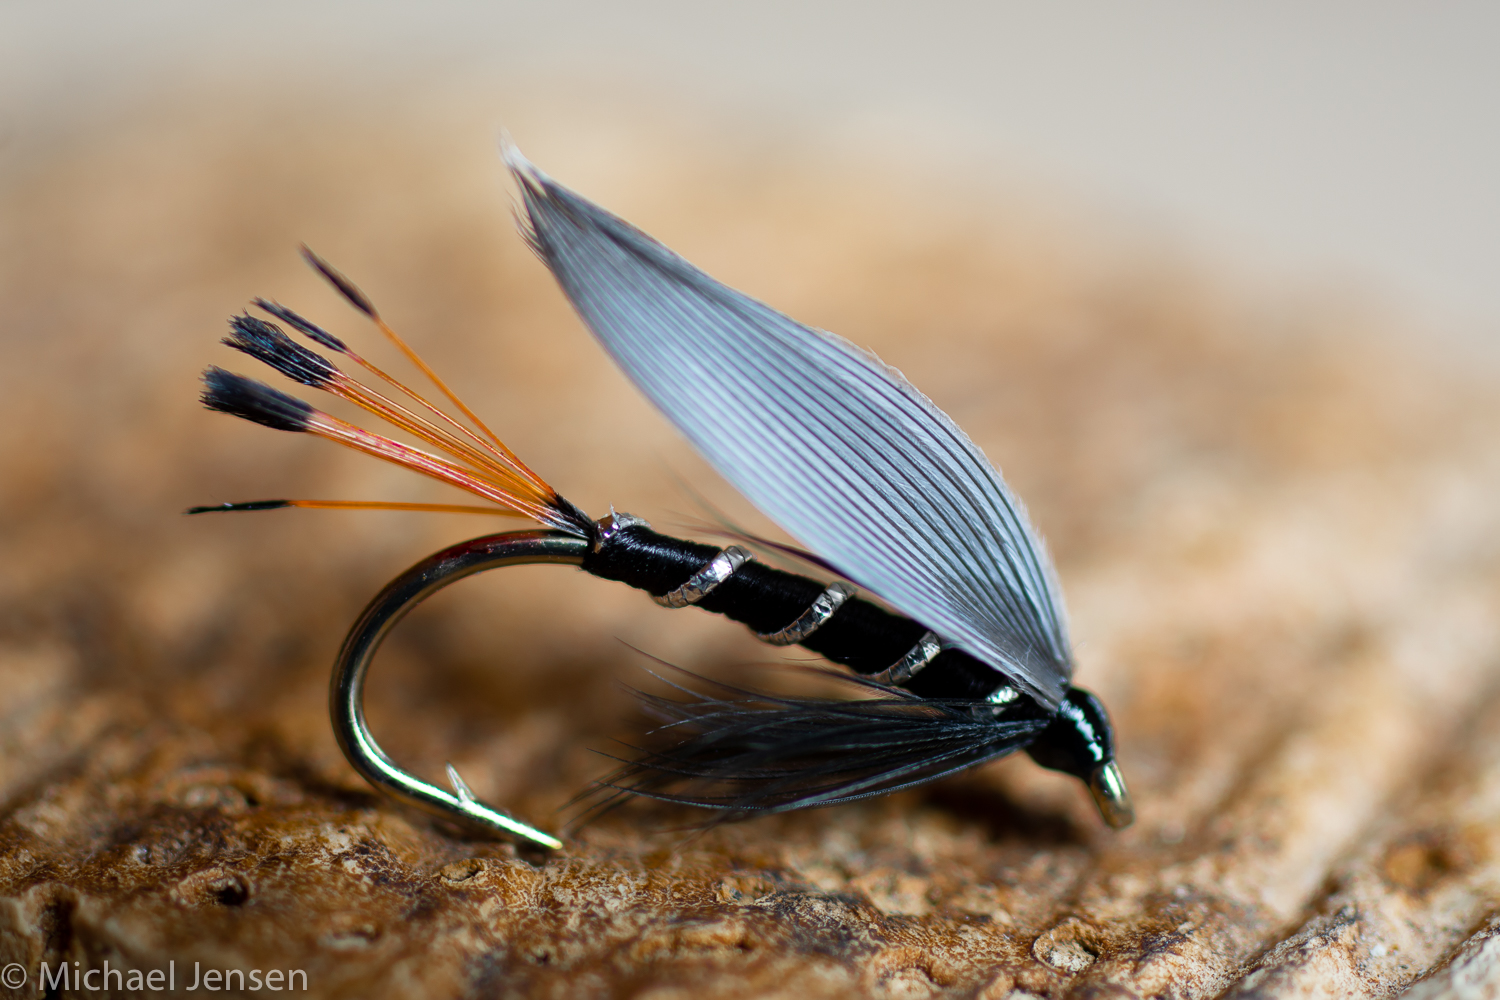 Wet Flies: Tying and Fishing Soft-Hackles, Winged and Wingless Wets, and  Fuzzy Nymphs